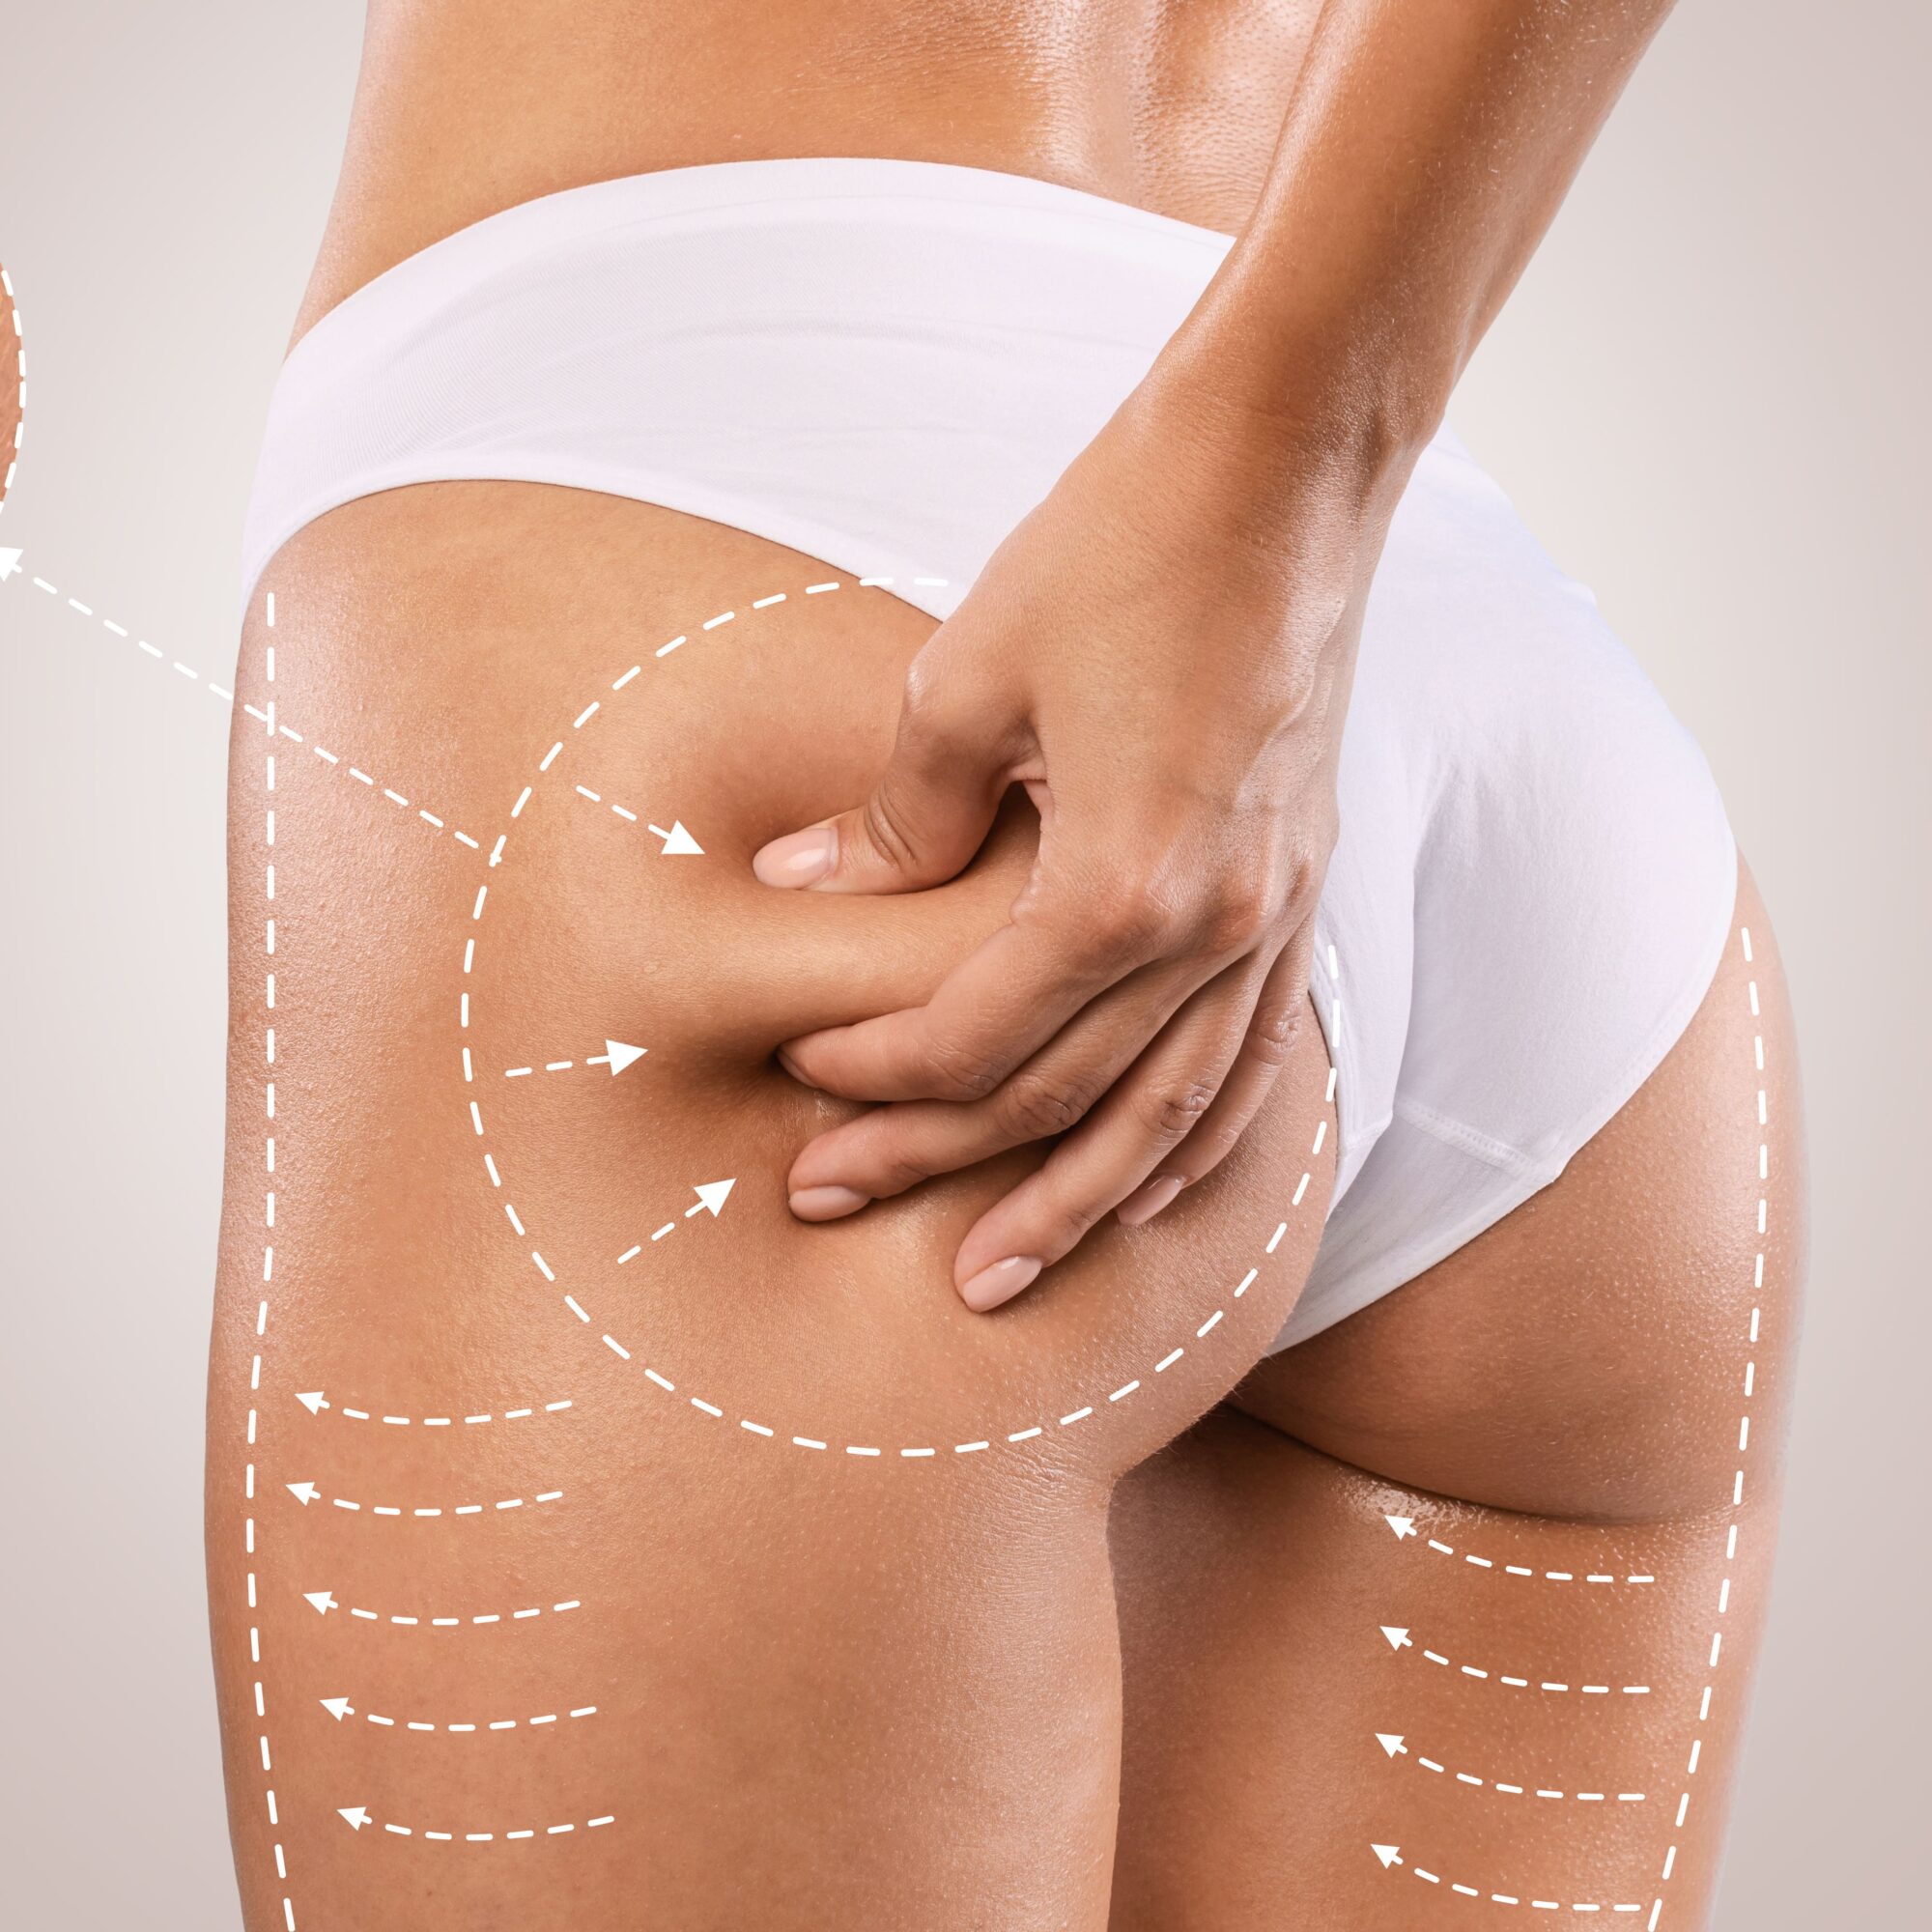 Brazilian Butt Lift by MilfordMD Cosmetic Dermatology Surgery & Laser Center in Milford PA